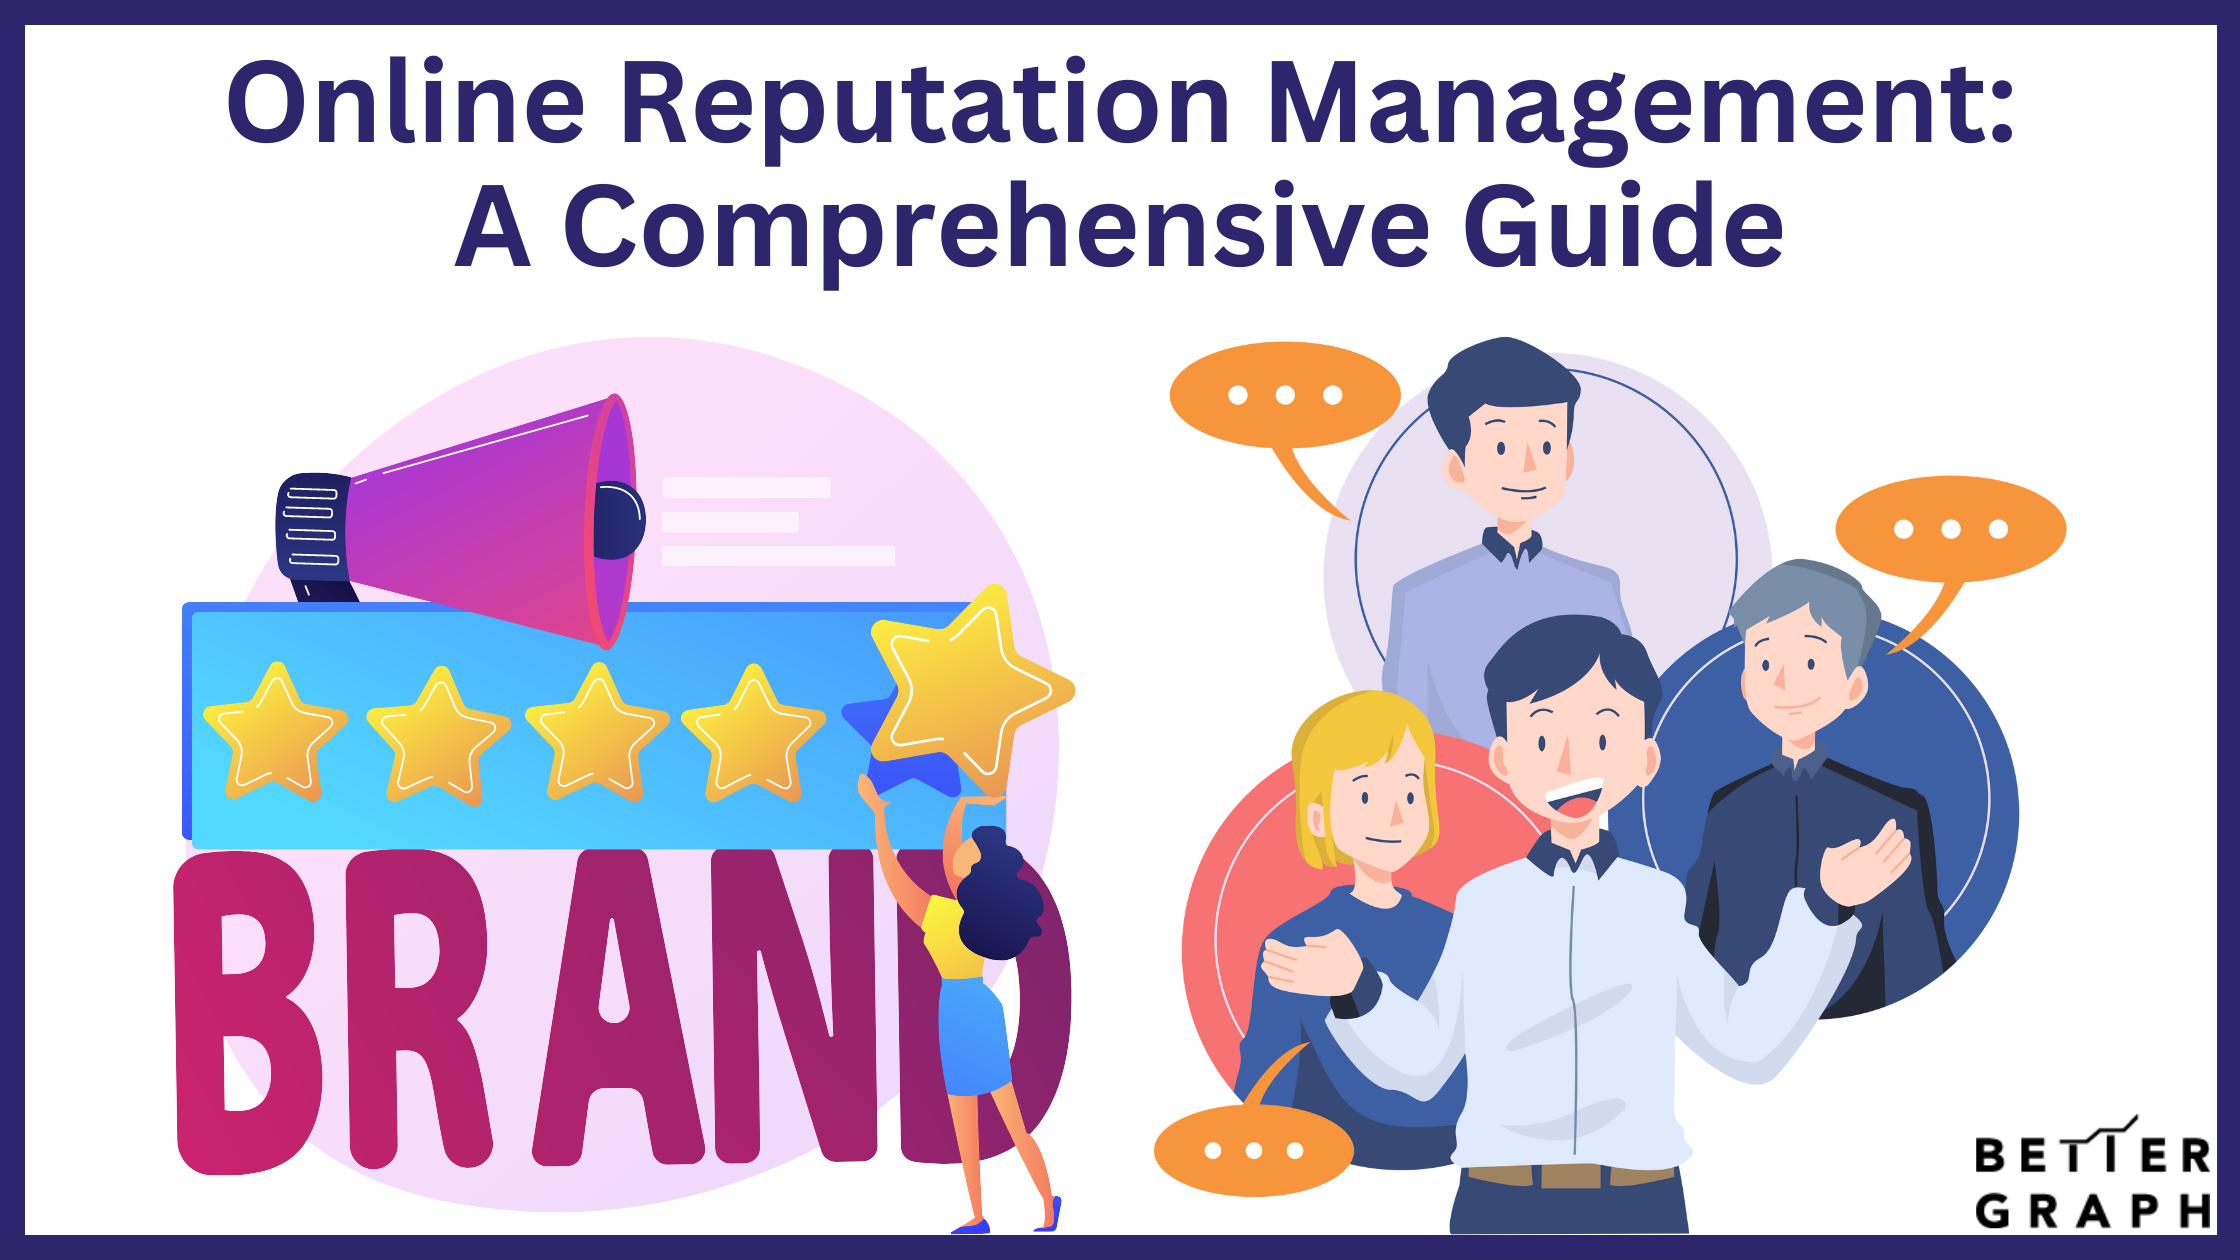 Online Reputation Management A Comprehensive Guide (1).png  by BetterGraph